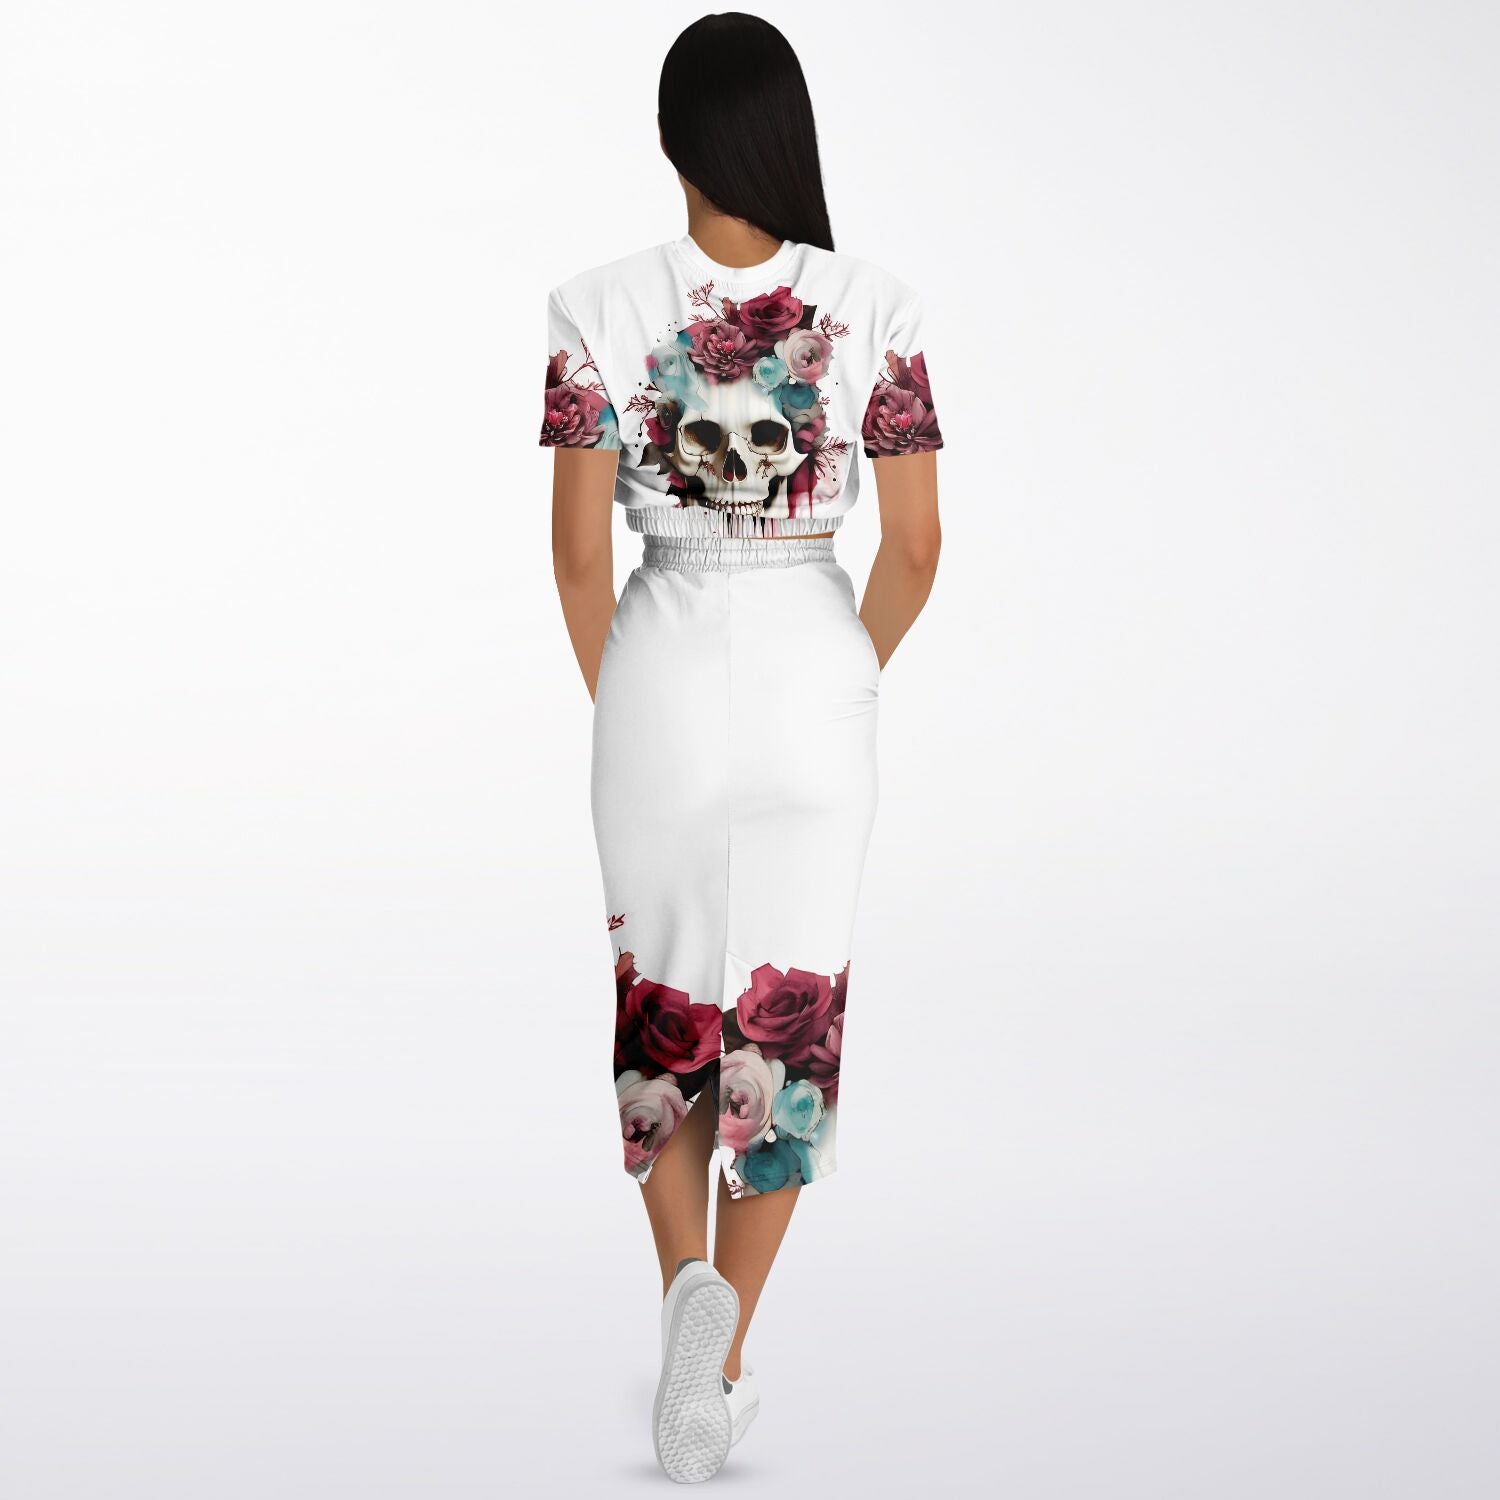 Roses Crown Skull Cropped Top and Long Skirt Set